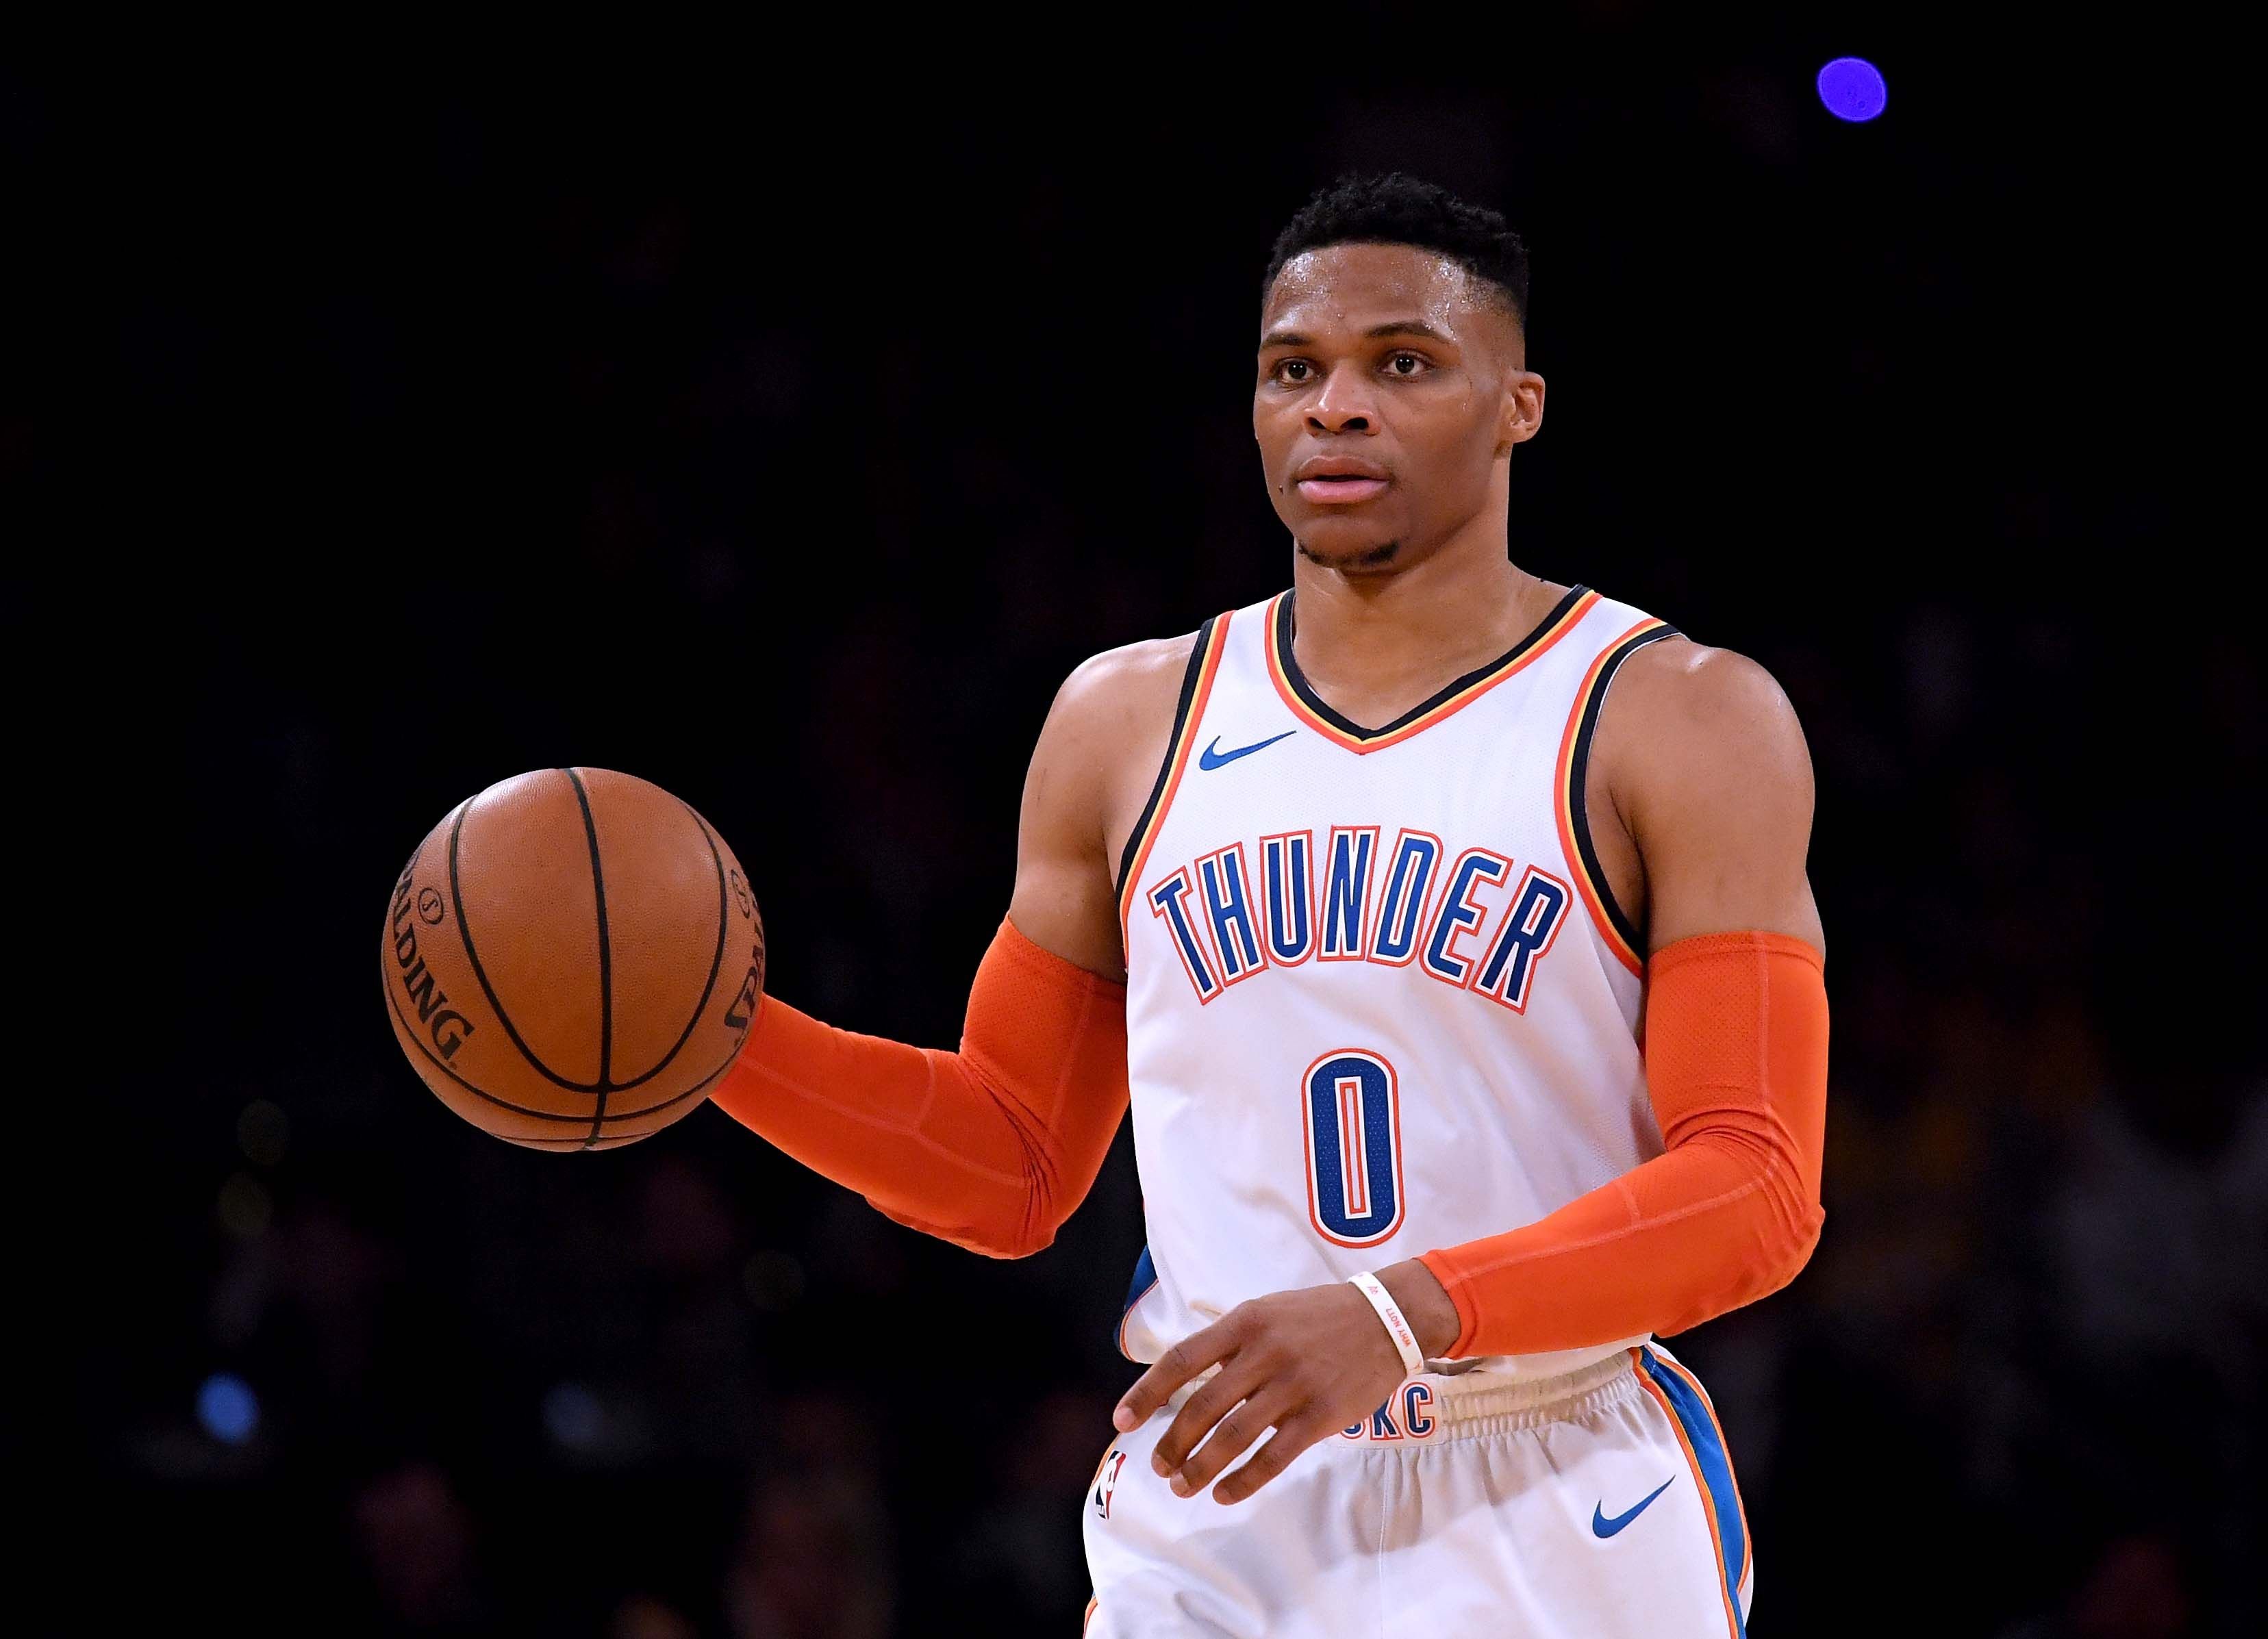 Russell Westbrook #0 of the Oklahoma City Thunder during a 107-100 win over the Los Angeles Lakers at Staples Center on January 02, 2019. | Source: Getty Images